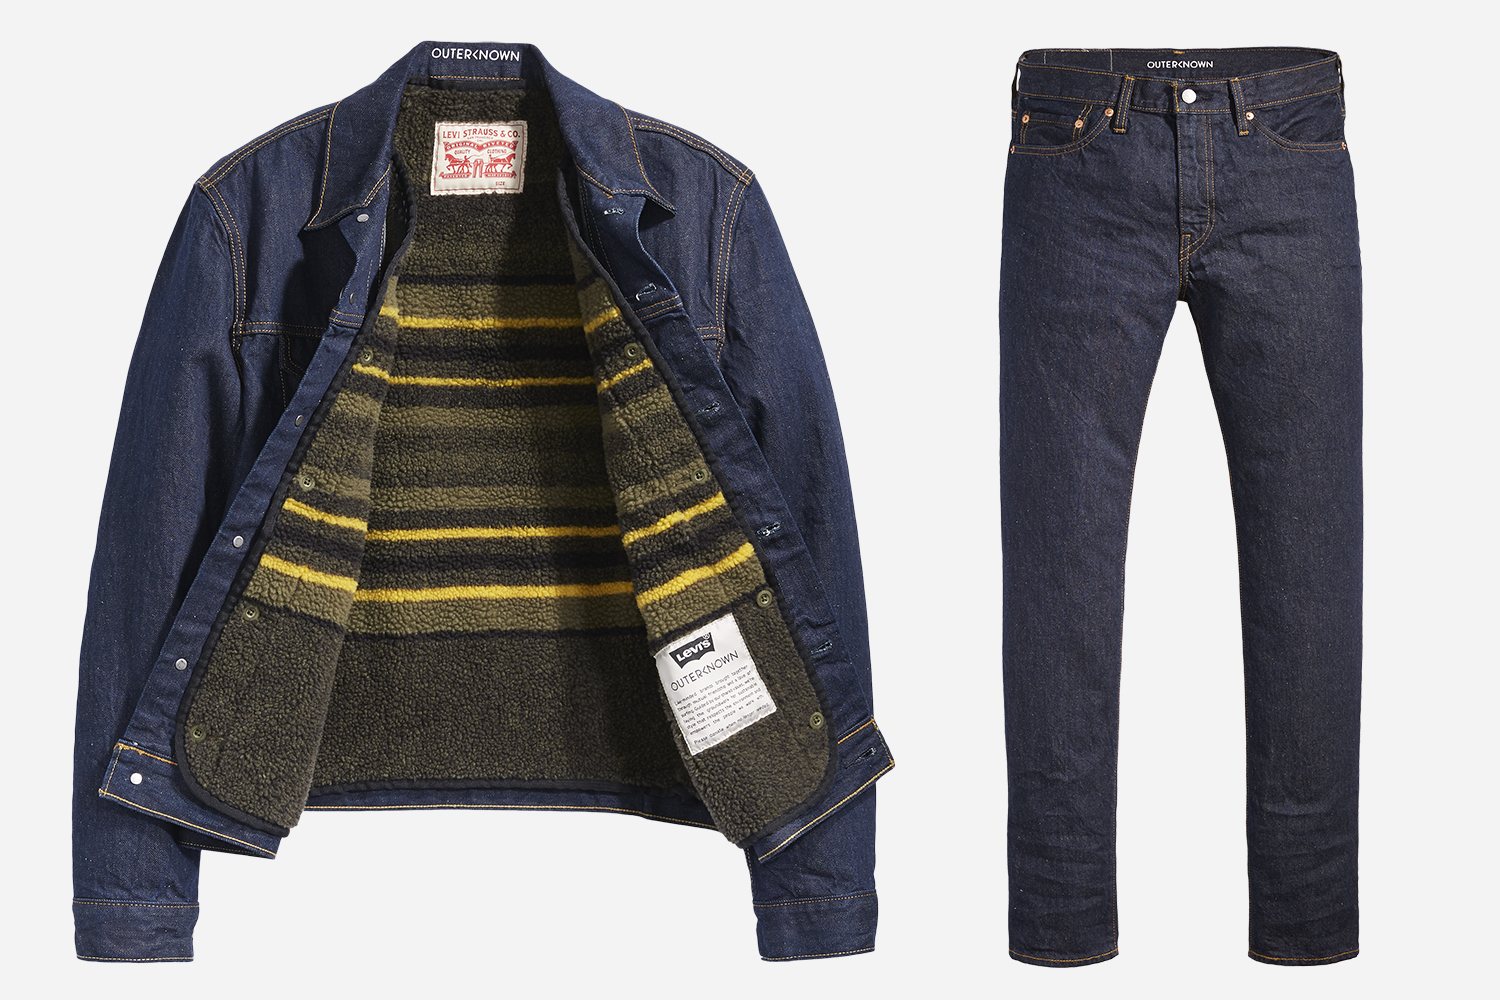 Levi's Wellthread x Outerknown Trucker Jacket and Denim Jeans